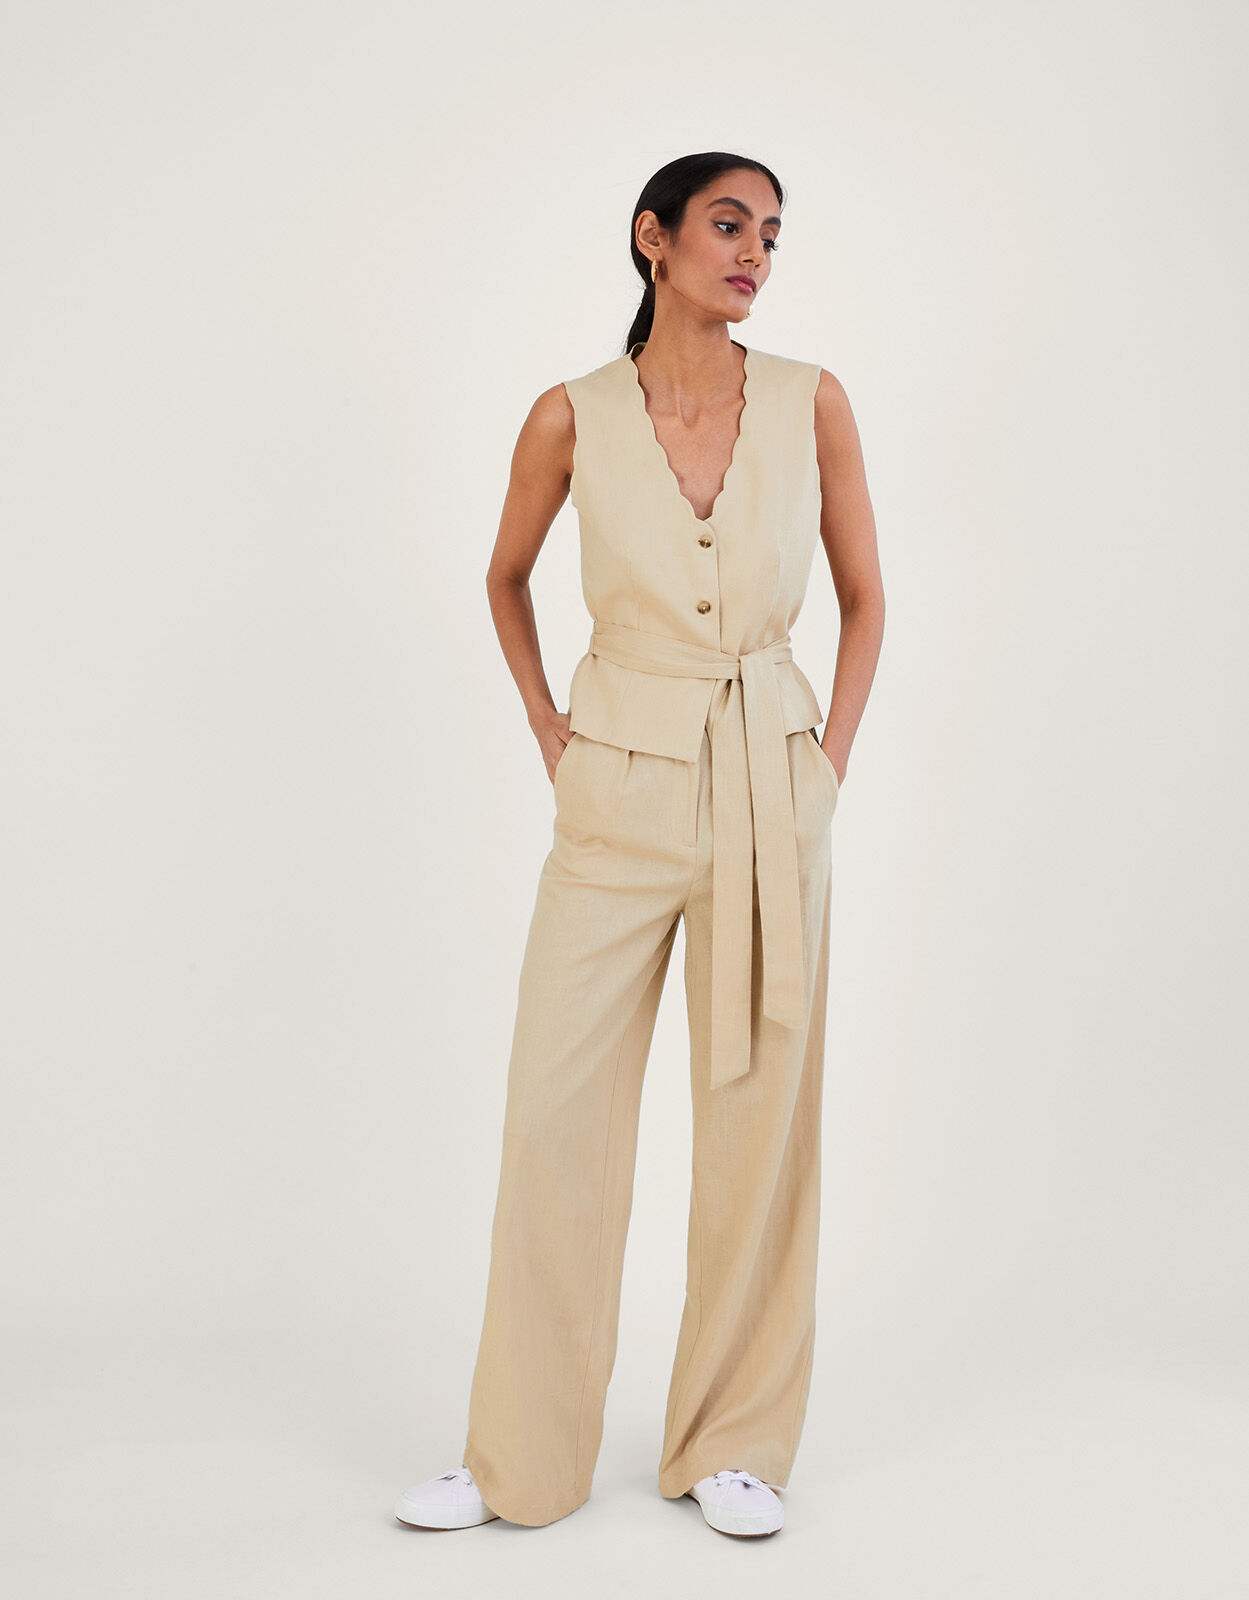 WHITE WIDE LINEN TROUSERS  Colmers Hill Fashion